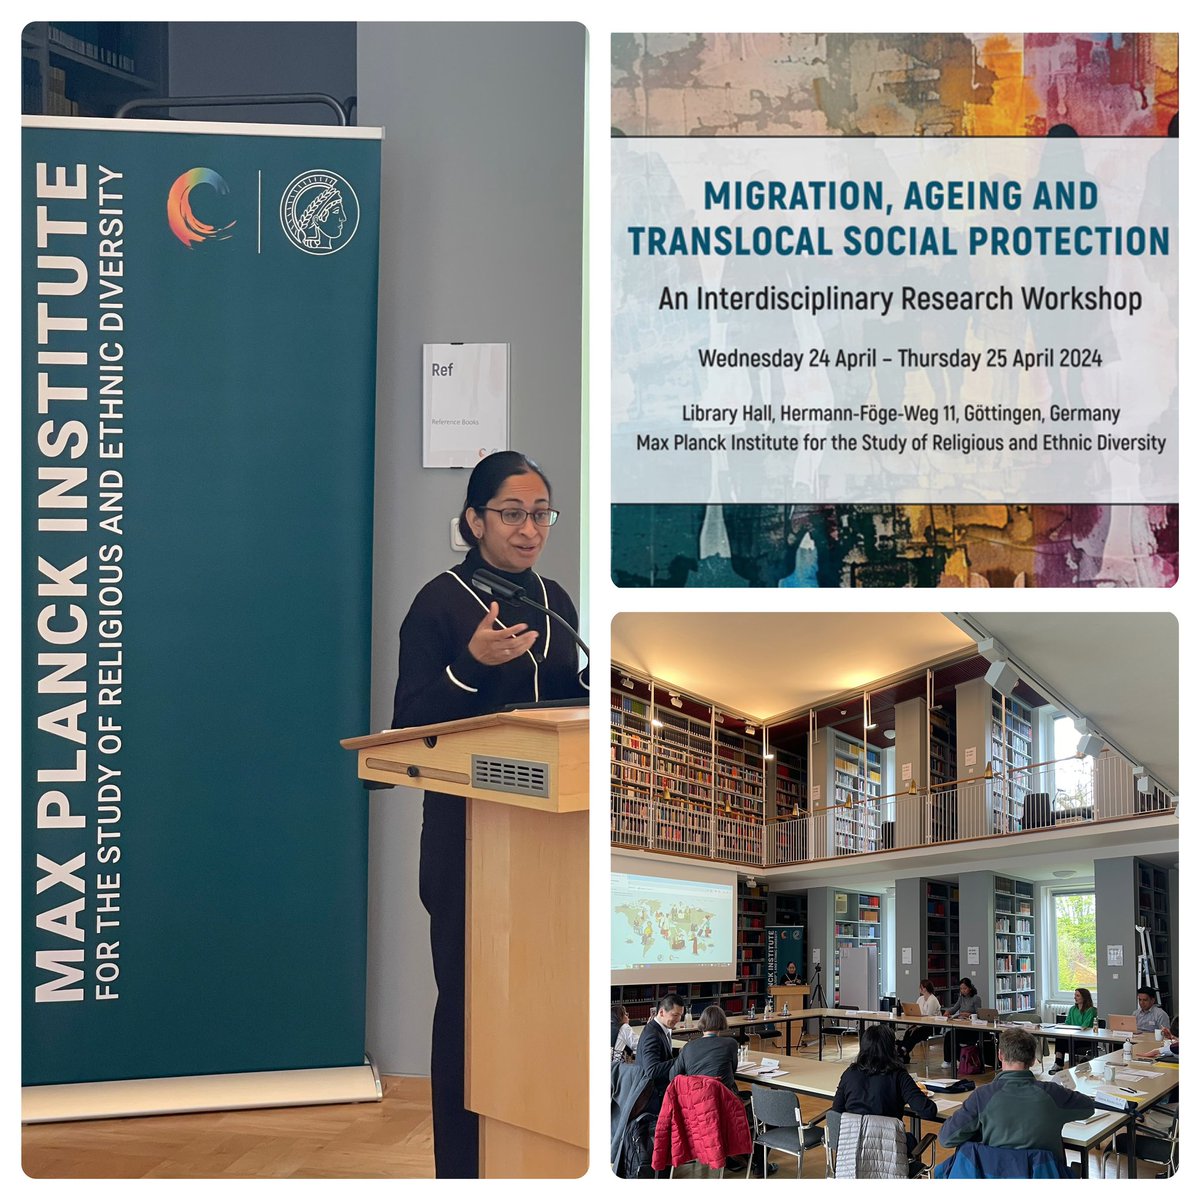 Kickoff to the 'Migration, Ageing & Translocal Social Protection' Workshop by @meghaamrith. Looking forward to discussions with a stellar group of scholars on questions of #transnational & #translocal social protection, focusing on the experiences of older migrants & refugees